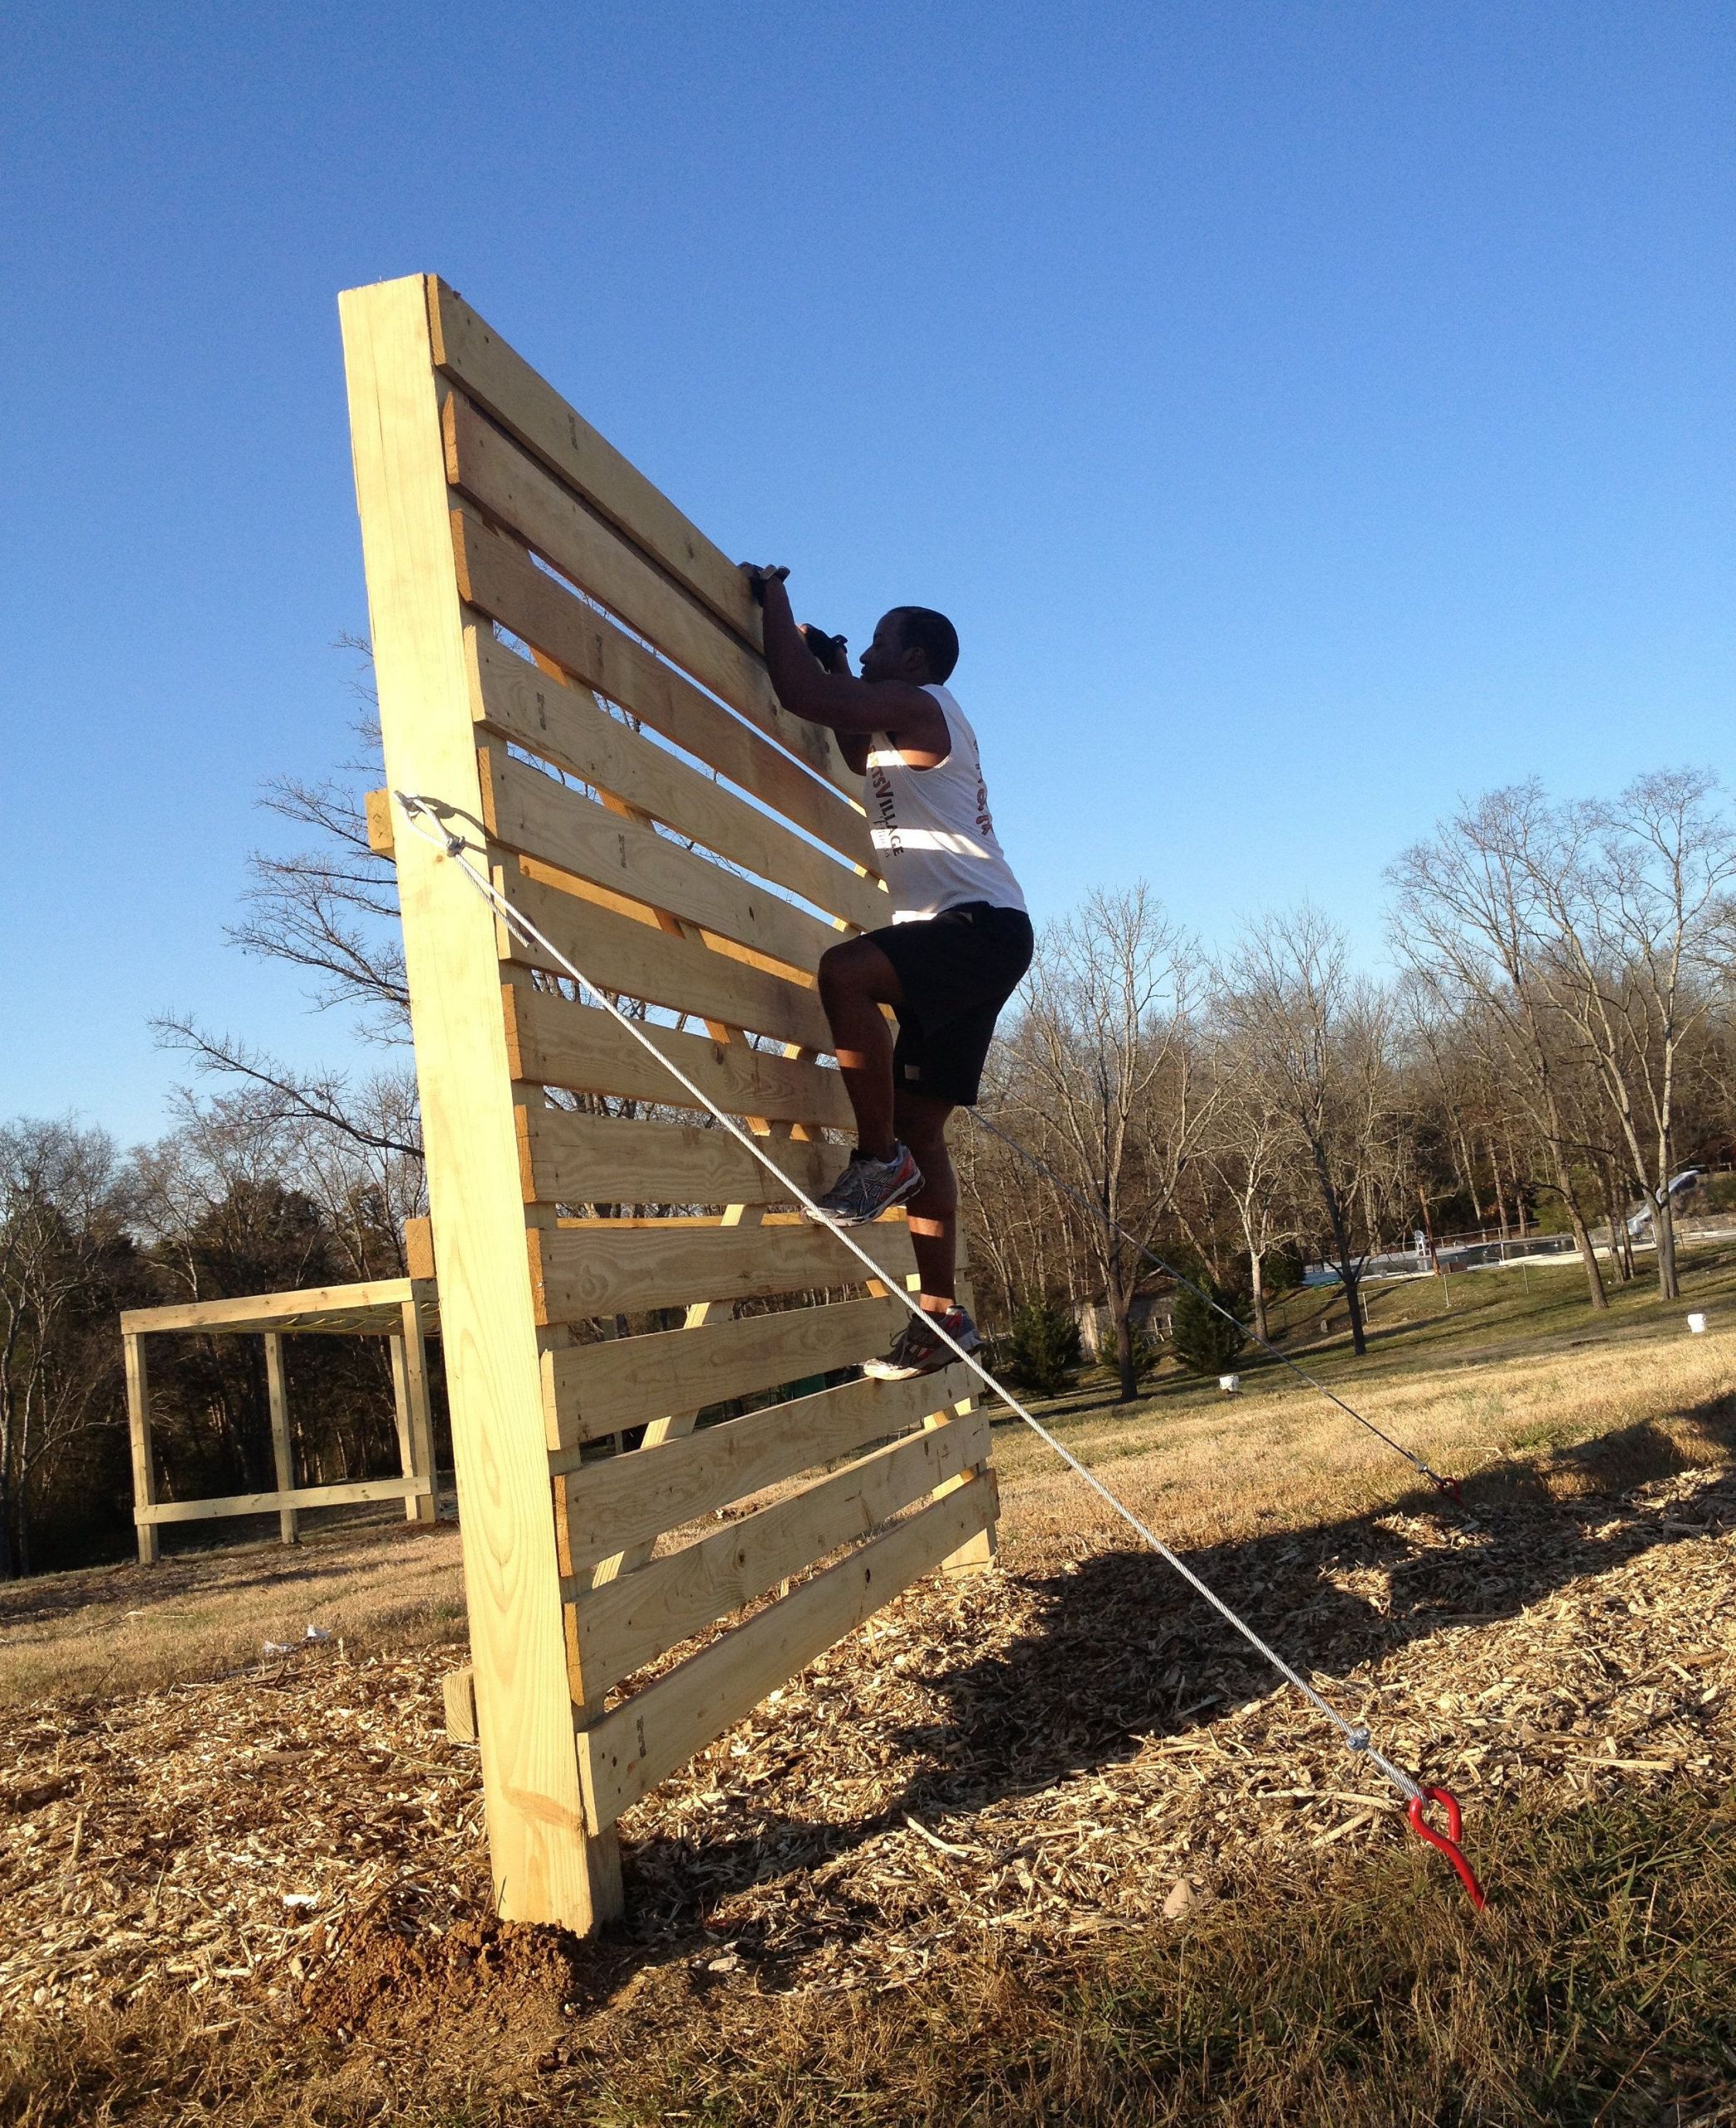 20 Of the Best Ideas for Diy Obstacle Course for Adults Home, Family